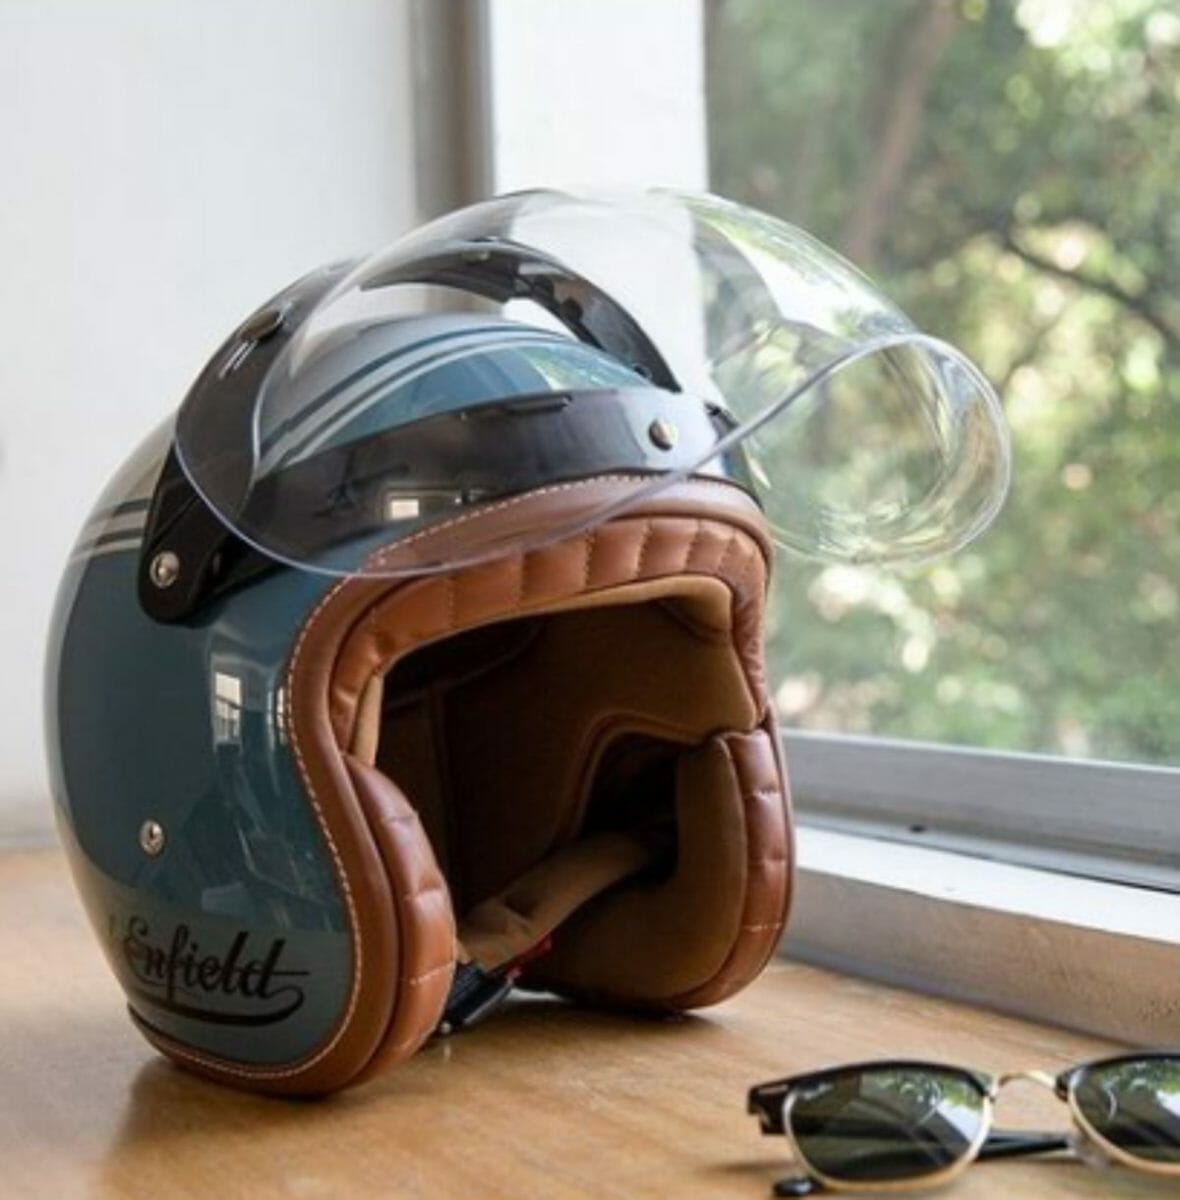 Royal enfield Limited edition helmet